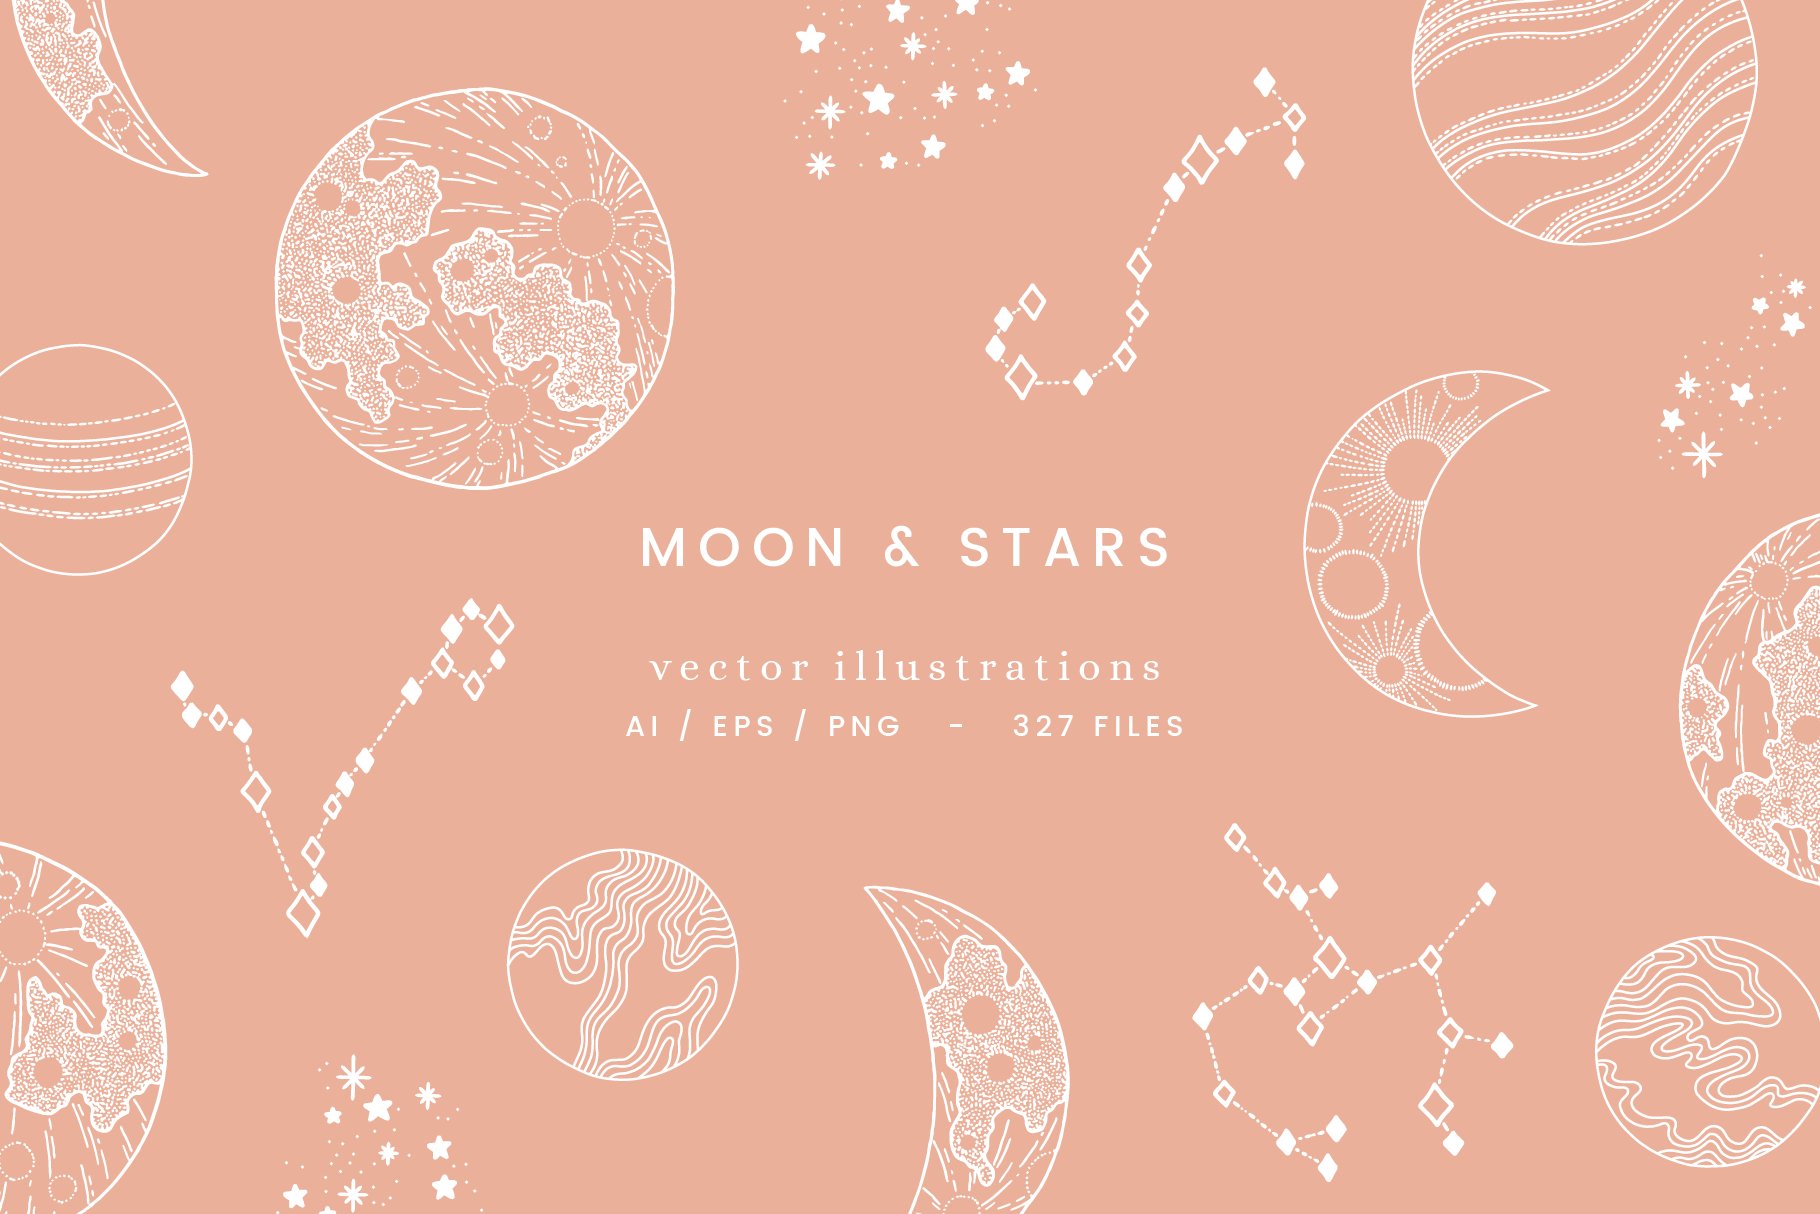 Moon & Stars Vector Illustrations cover image.